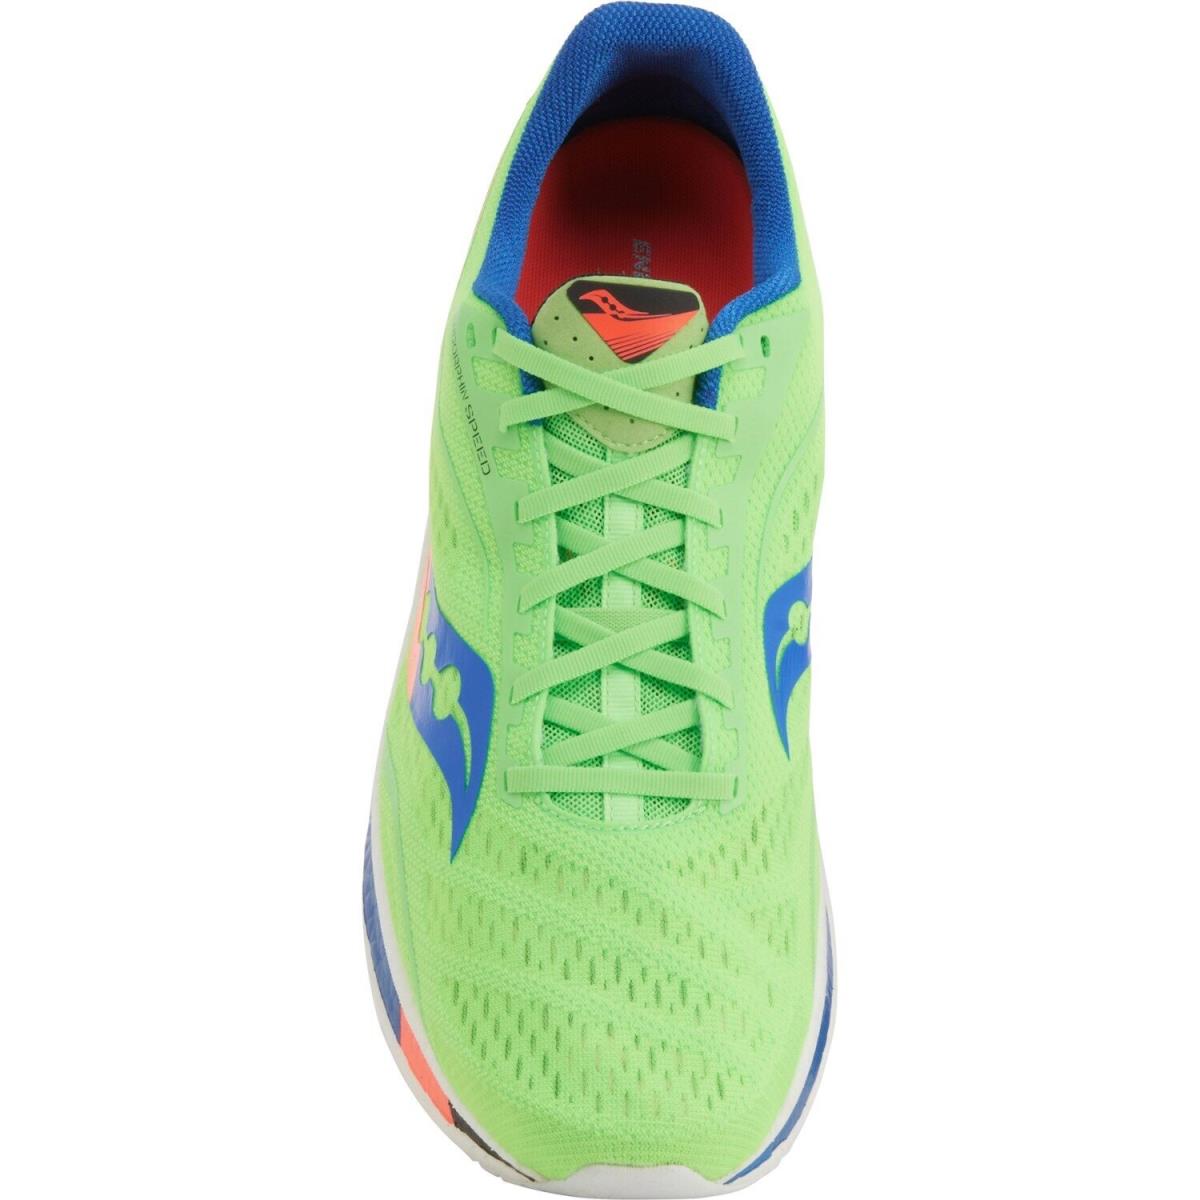 Saucony shoes Endorphin Speed Pitti - Green/Blue 2